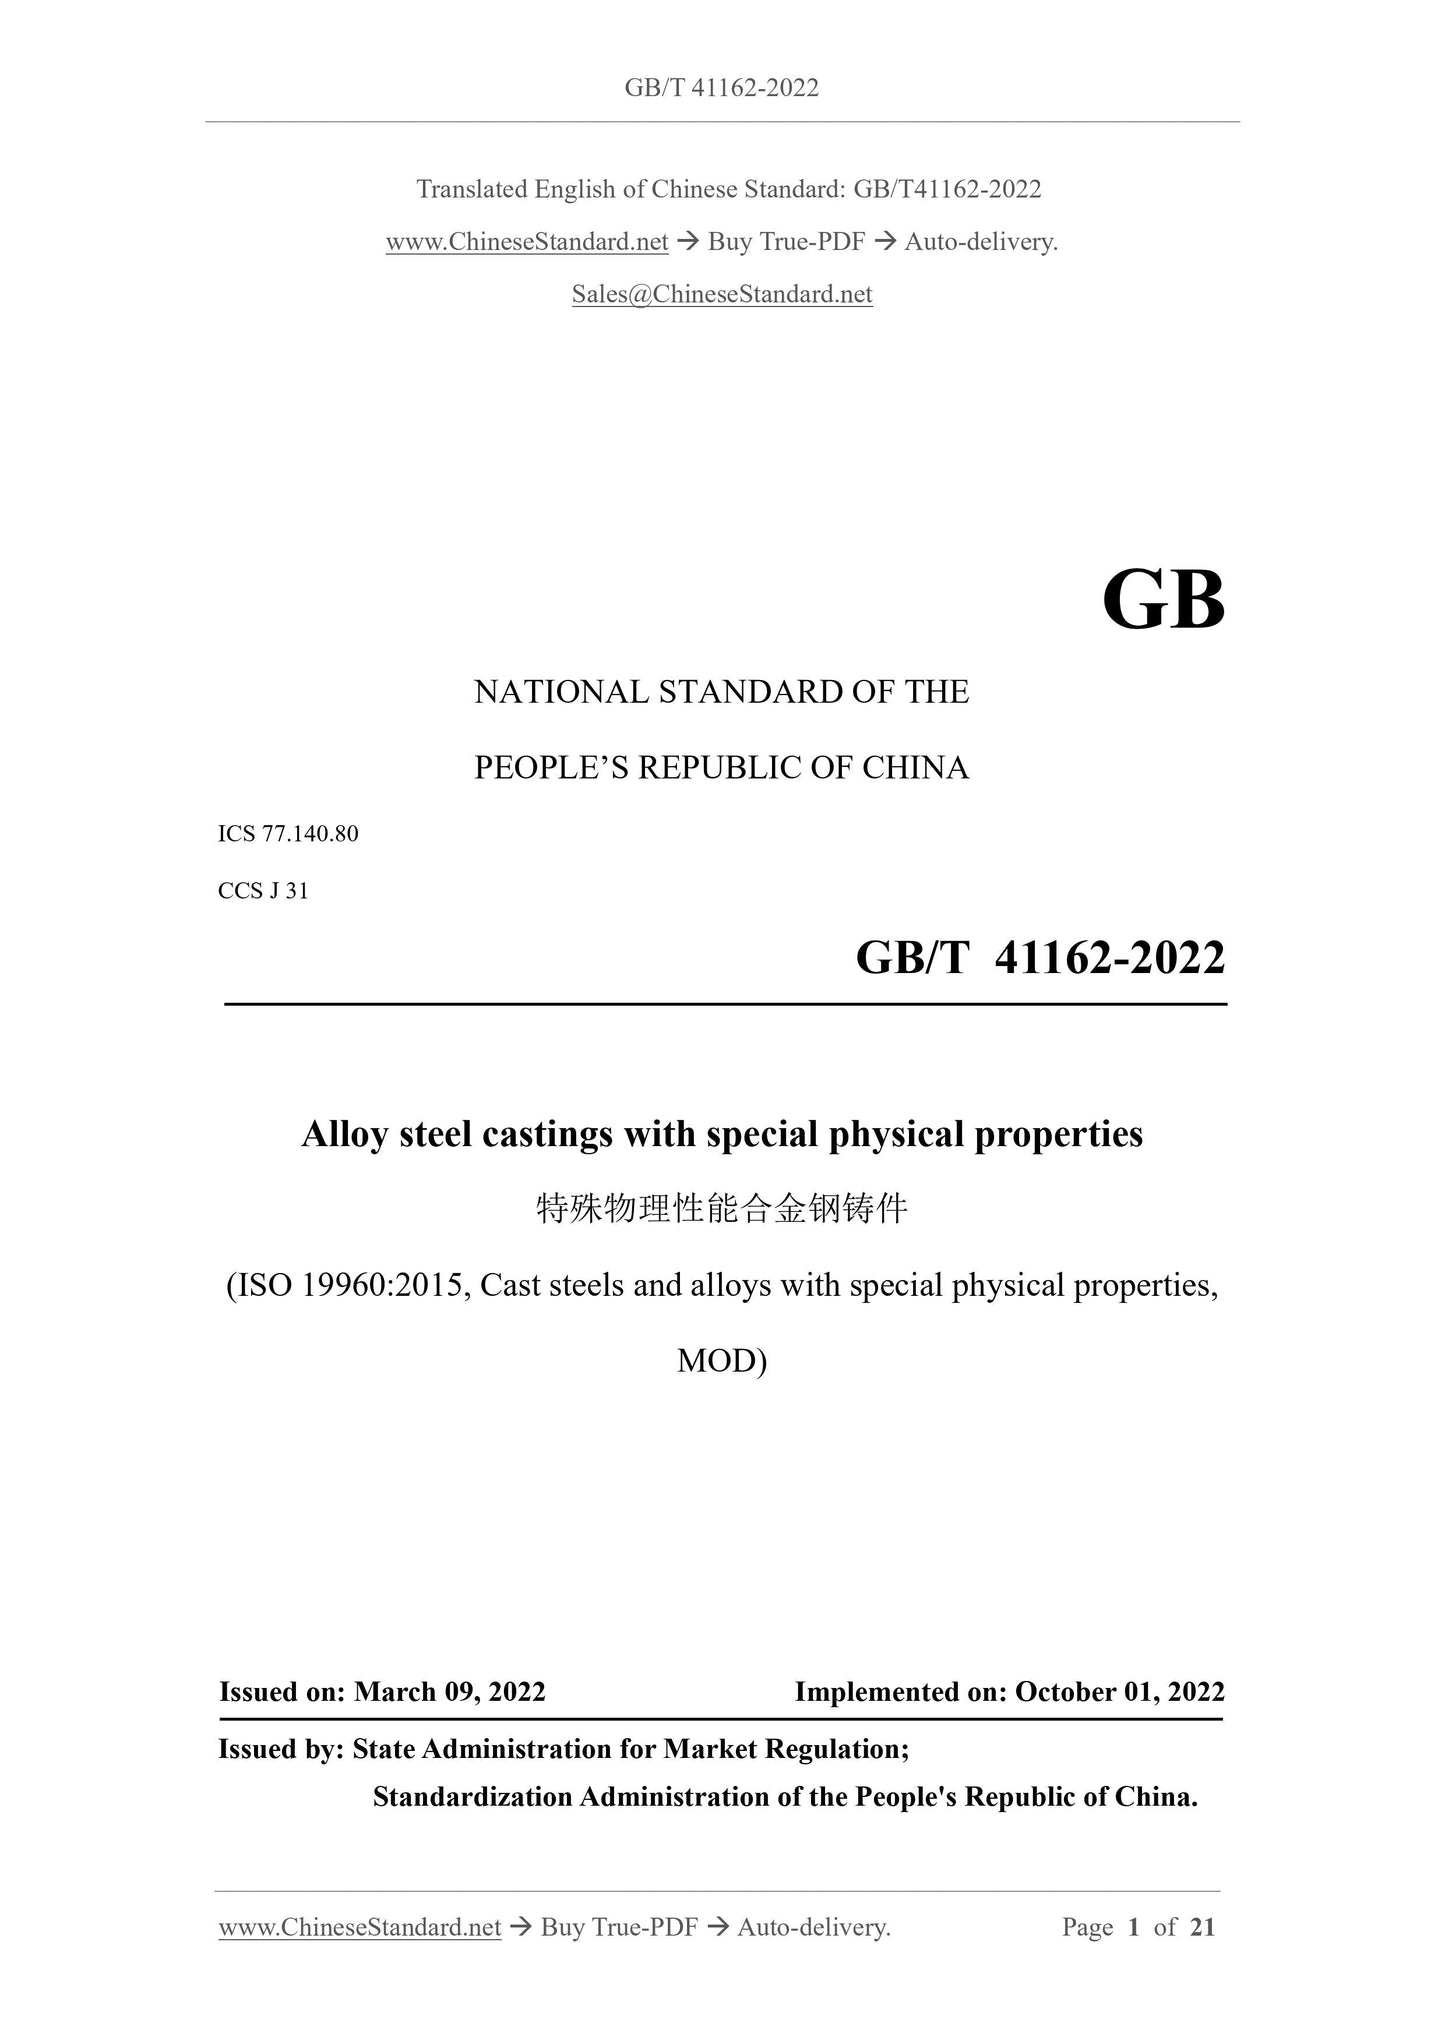 GB/T 41162-2022 Page 1